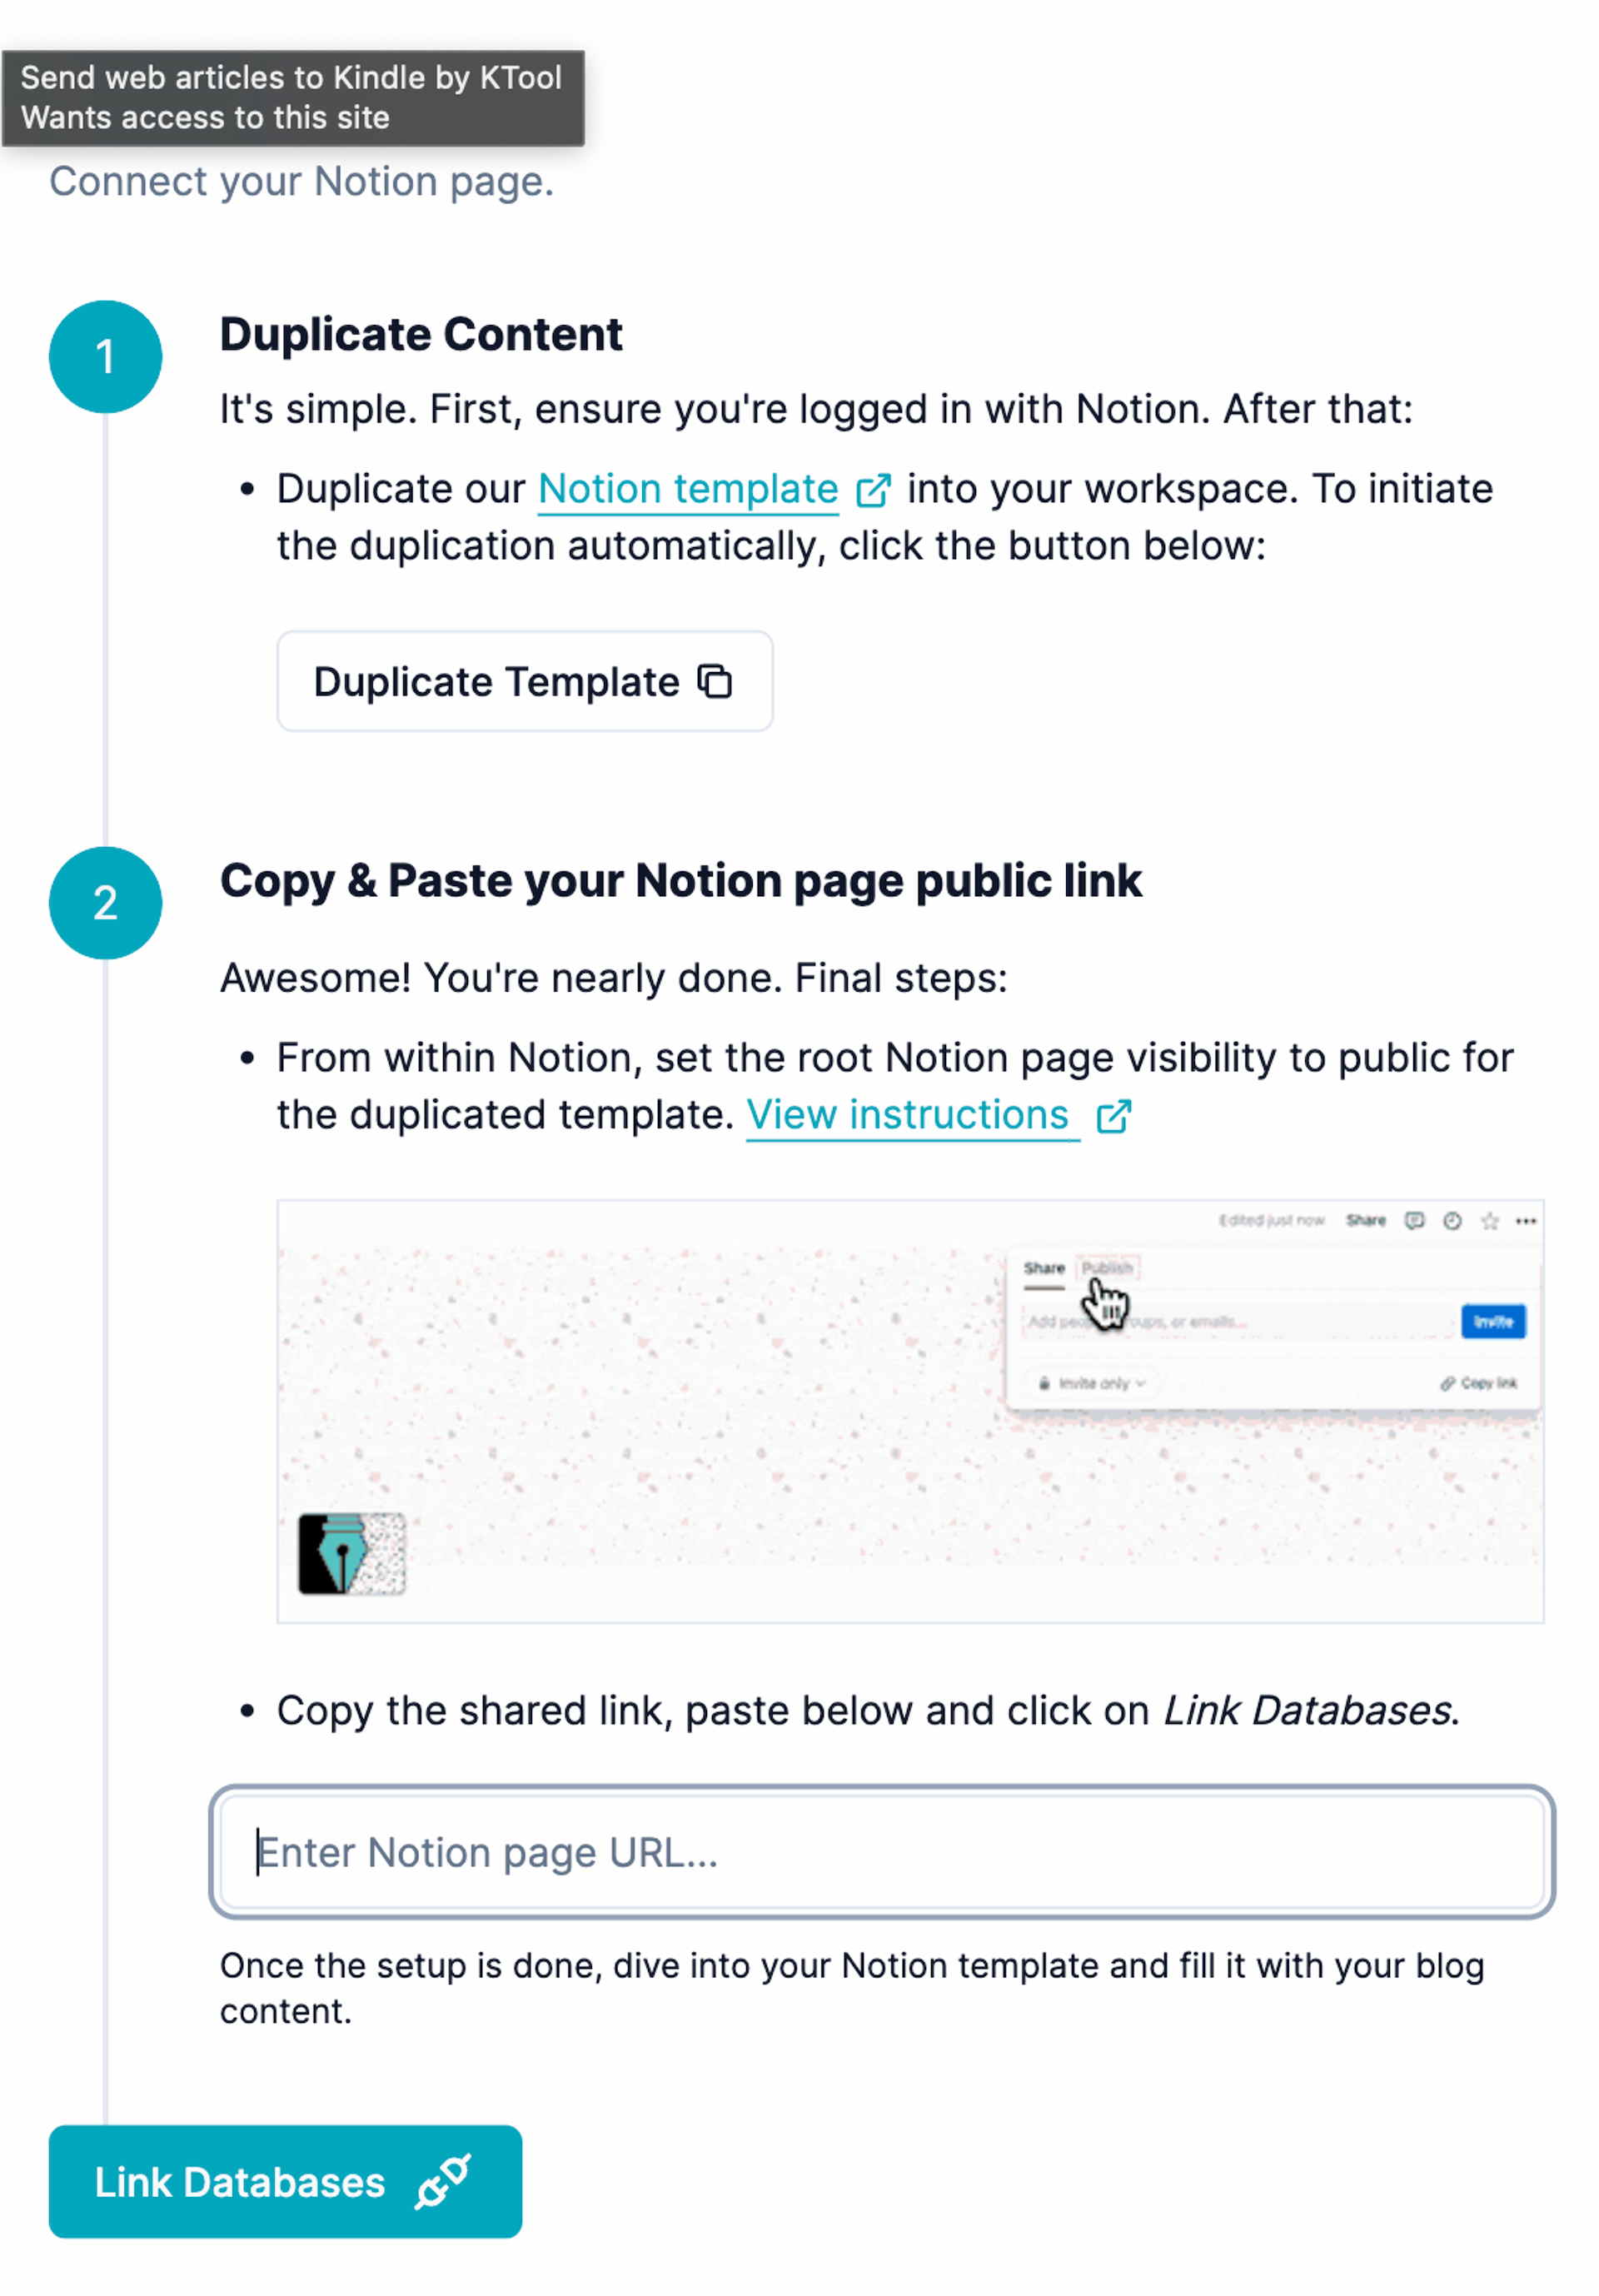 After clicking on “Duplicate Template” the duplicate button is de-focused and “Link Databases” is now the focus with an instruction GIF on what needs to be done.